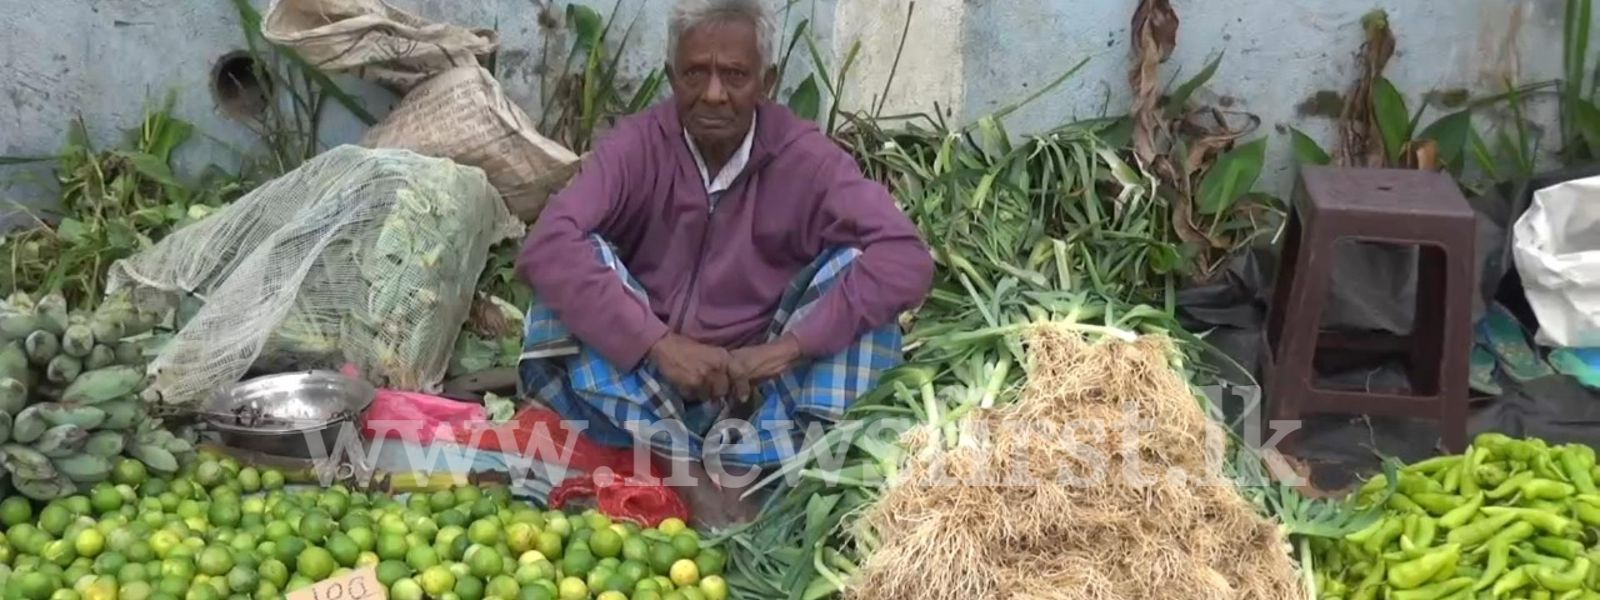 Fuel shortage reflected in vegetable prices